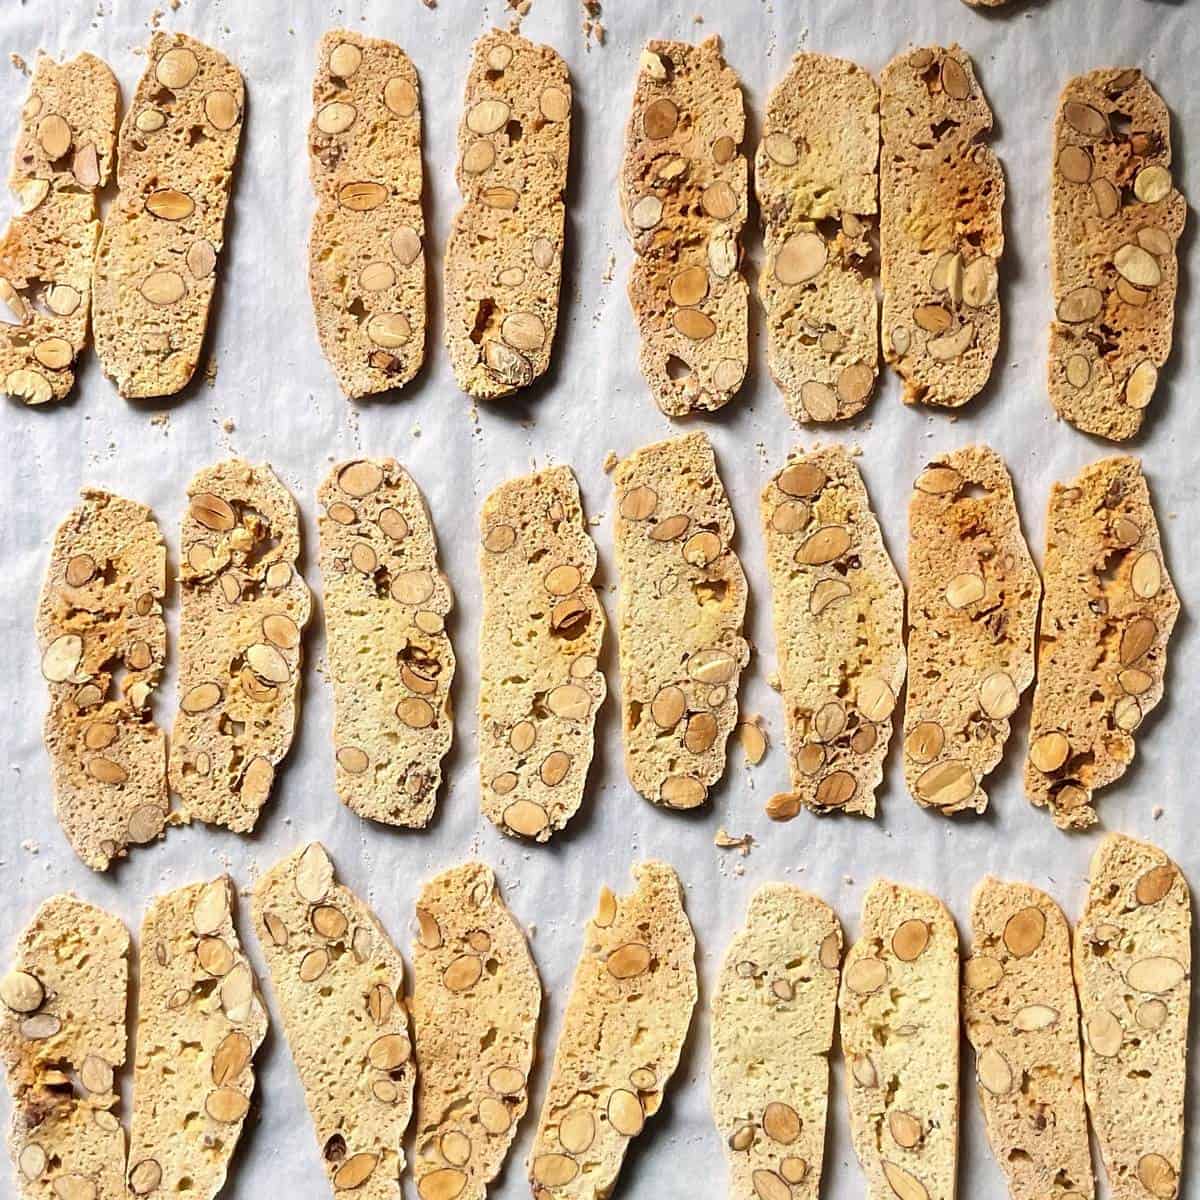 Thin sliced biscotti on a parchment lined baking sheet.